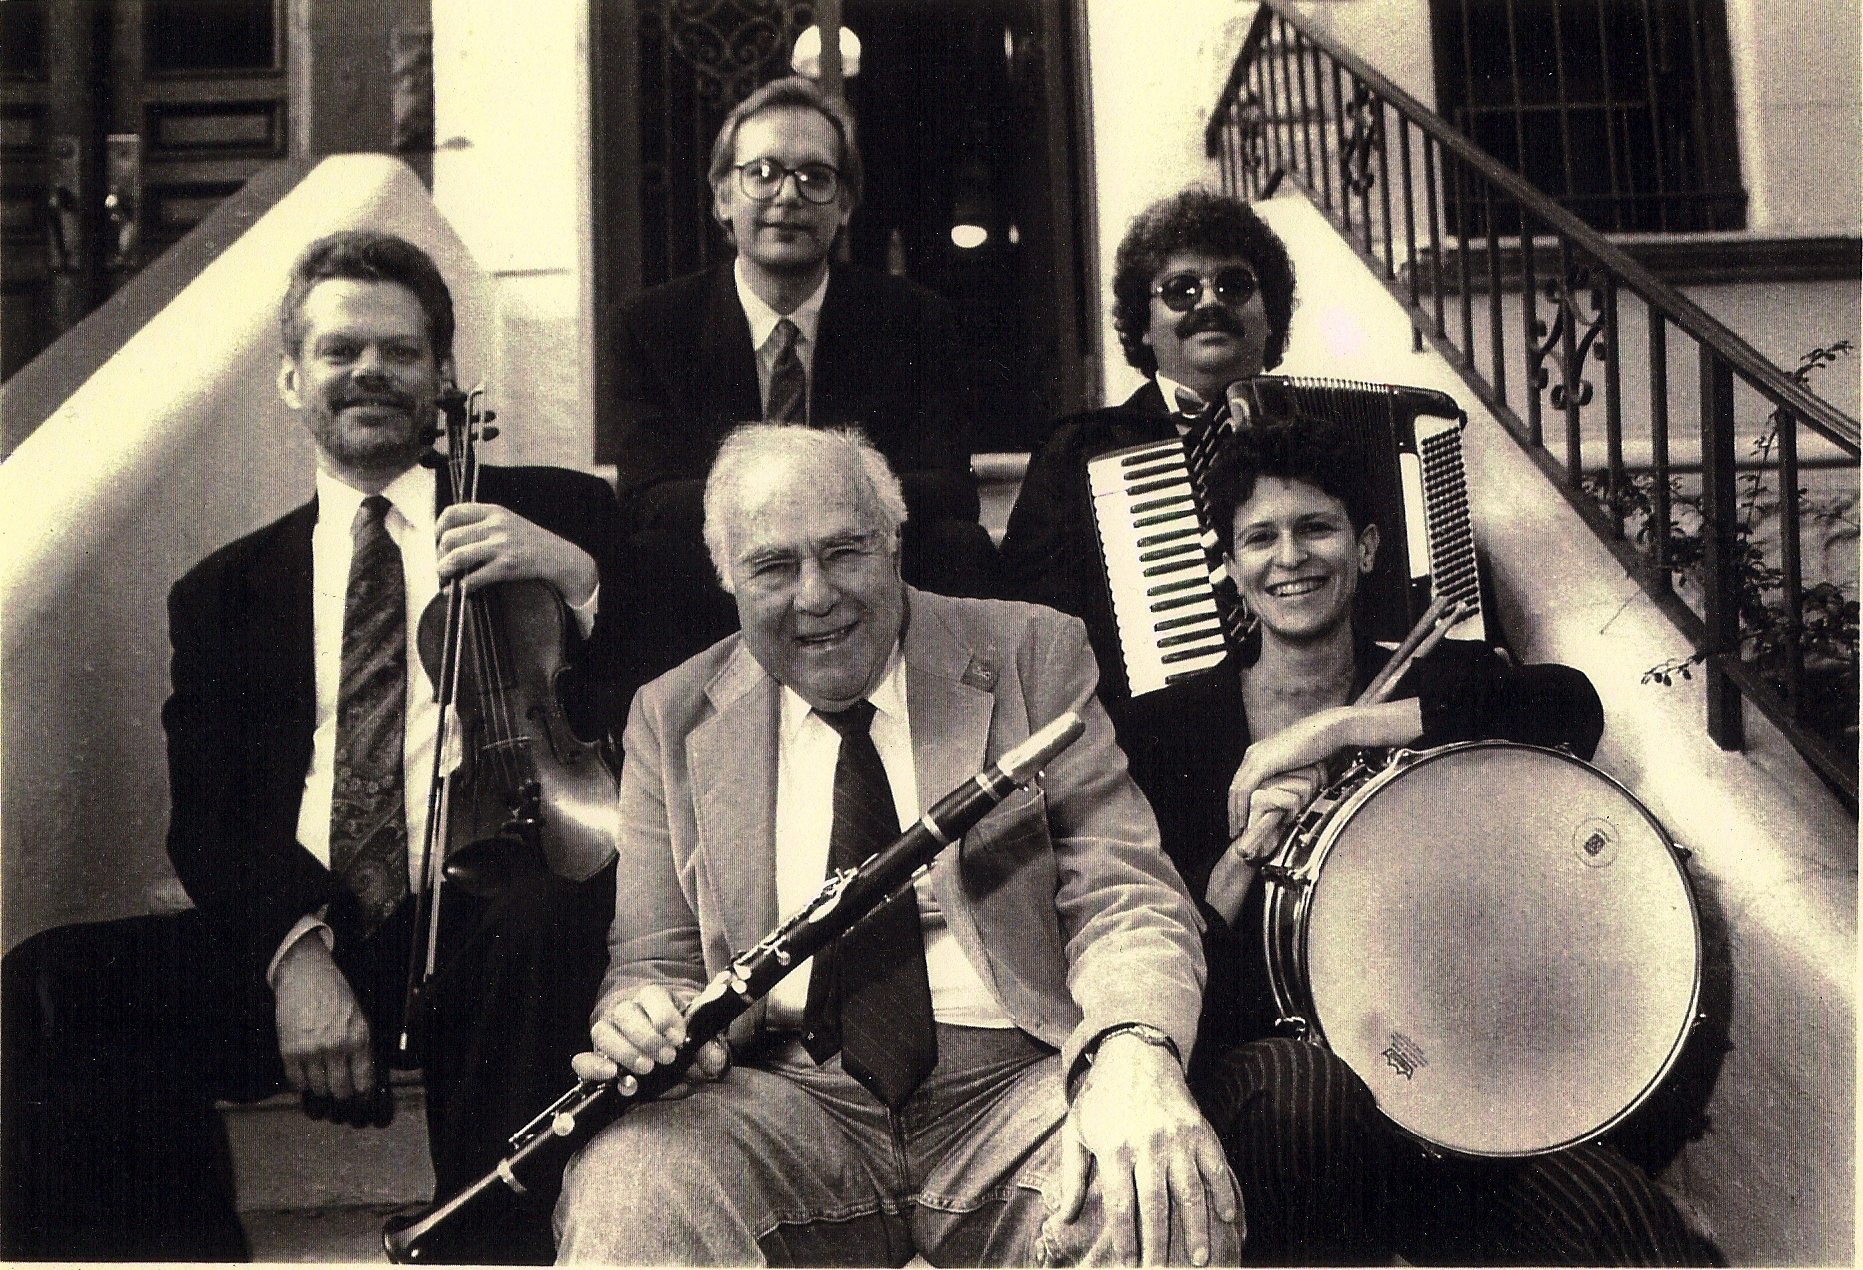 Photo of Michael Hess (holding violin), Howie Leess (holding clarinet), Michael Hess, smail Butera (holding accordion), and Eve Sicular (holding a snare drum)